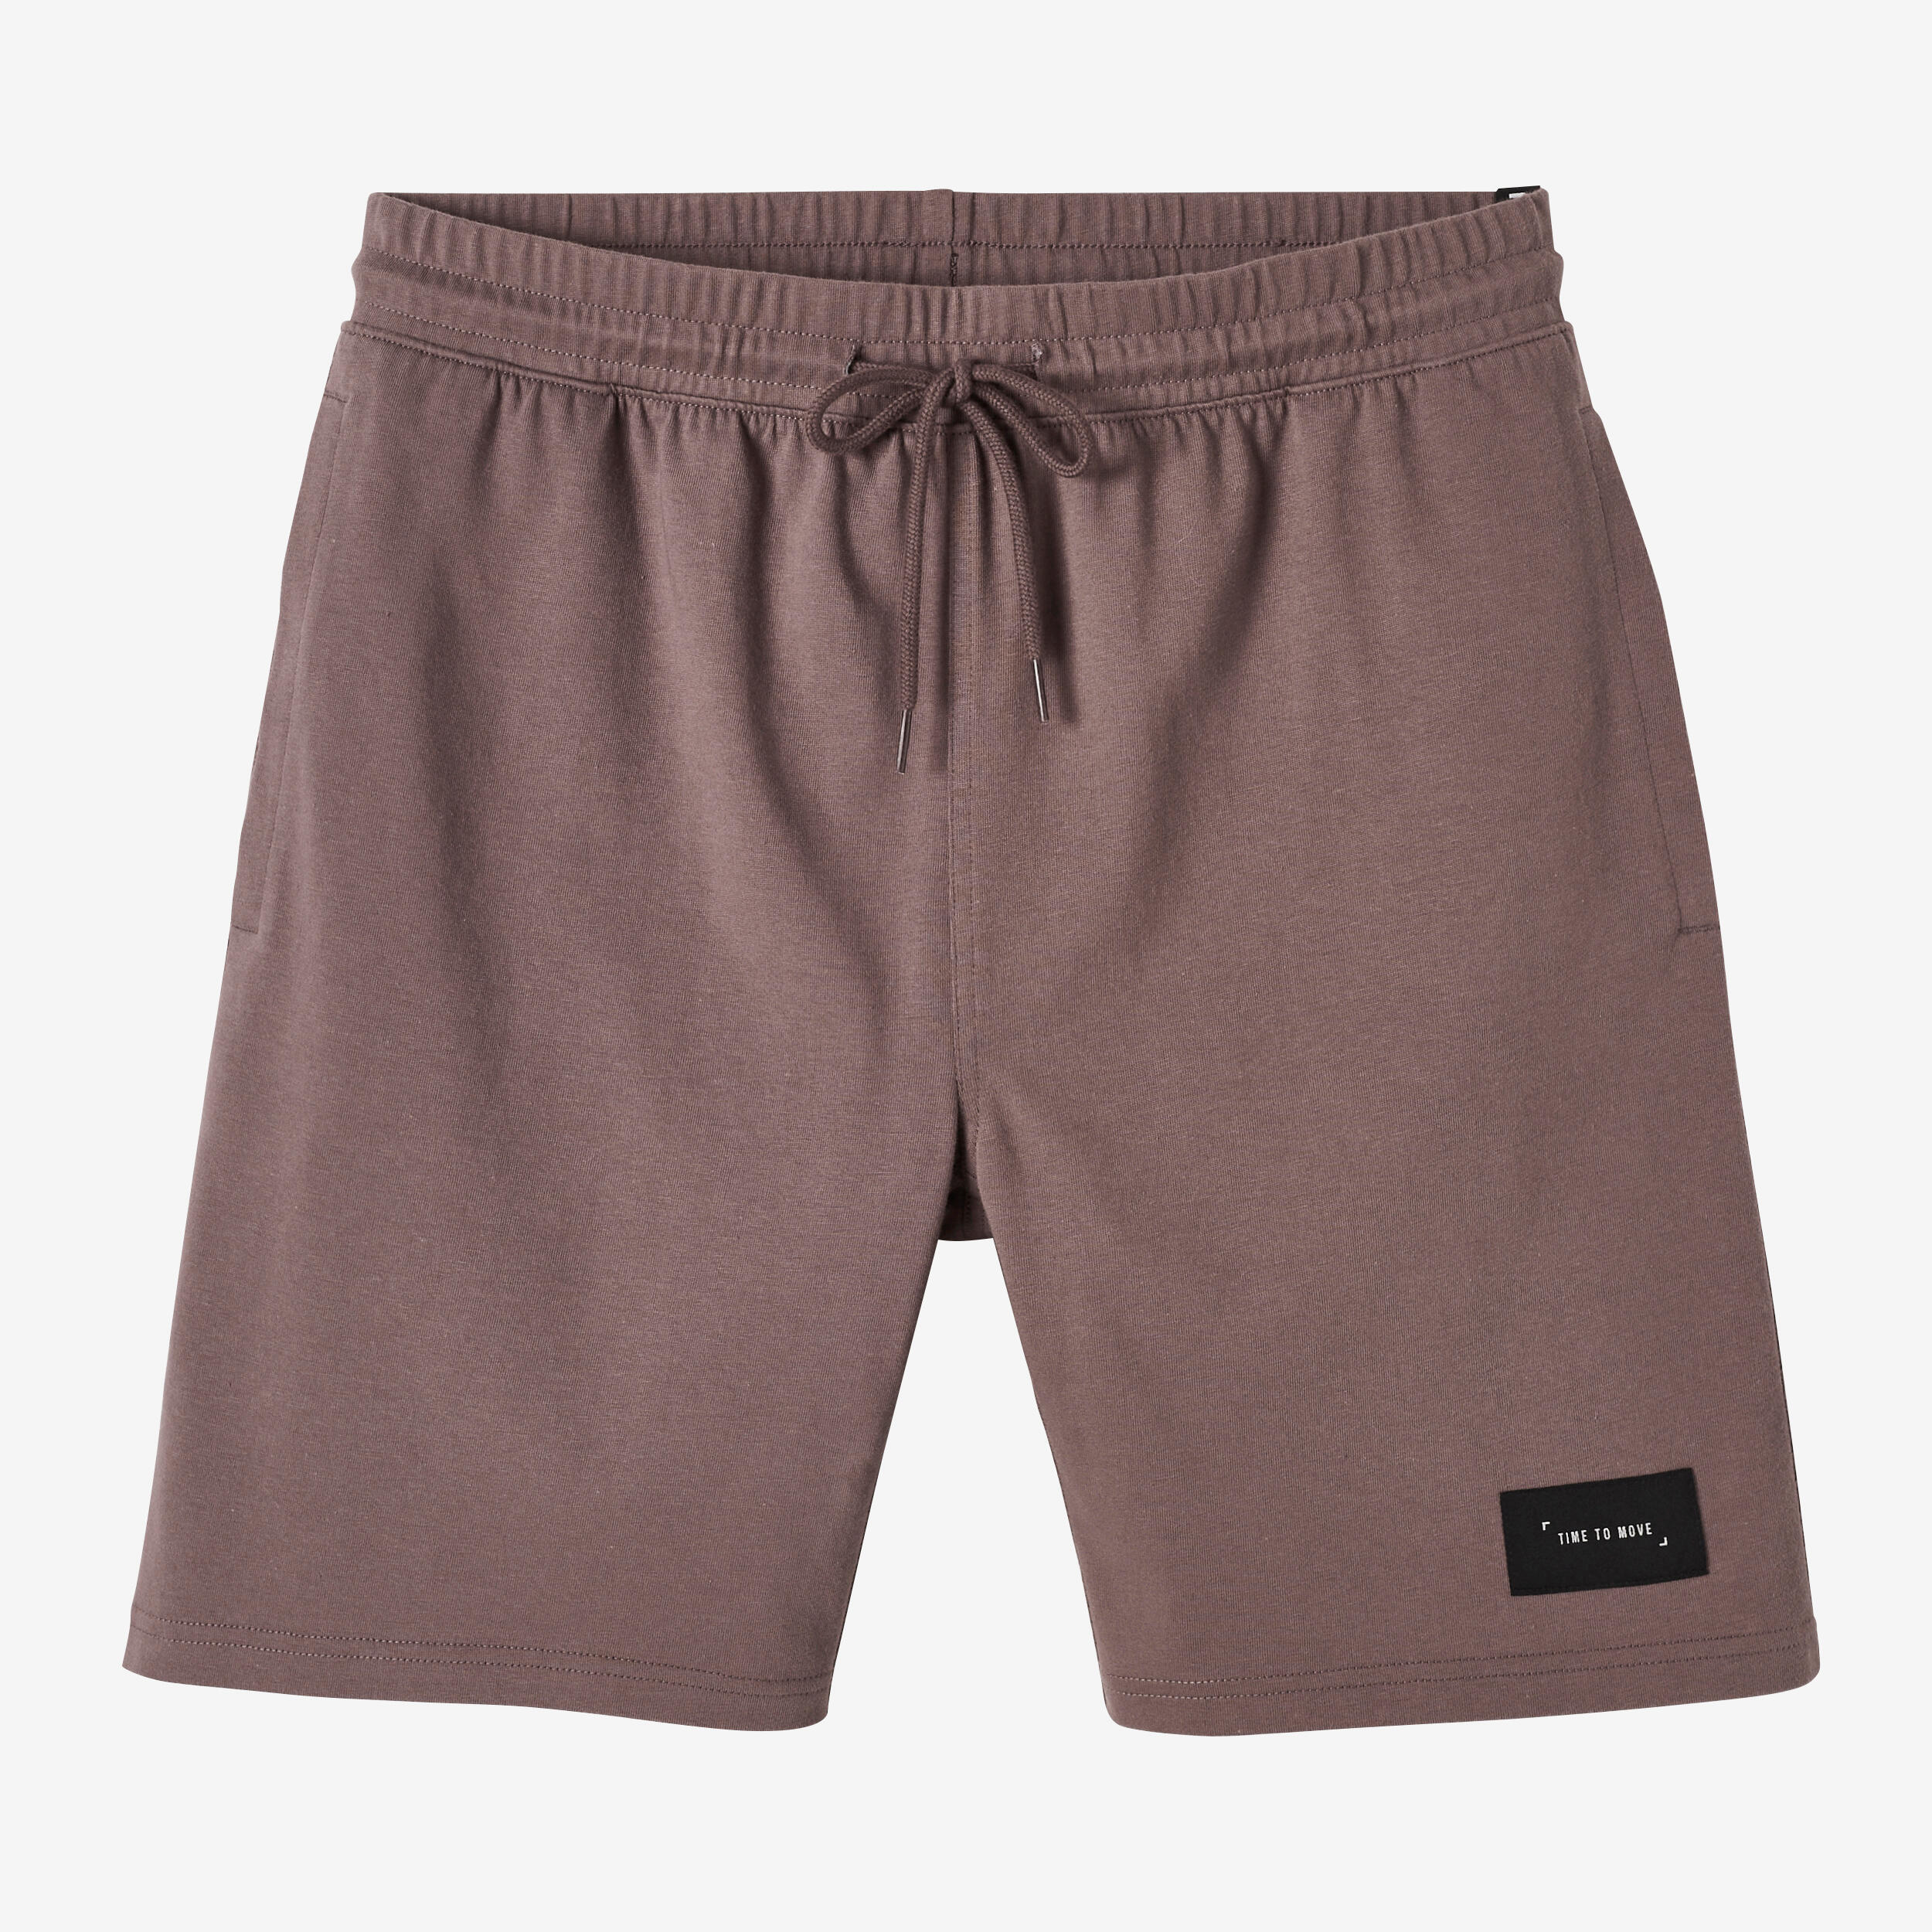 Men's Straight-Cut Cotton Fitness Shorts with Pocket - Grey 7/7